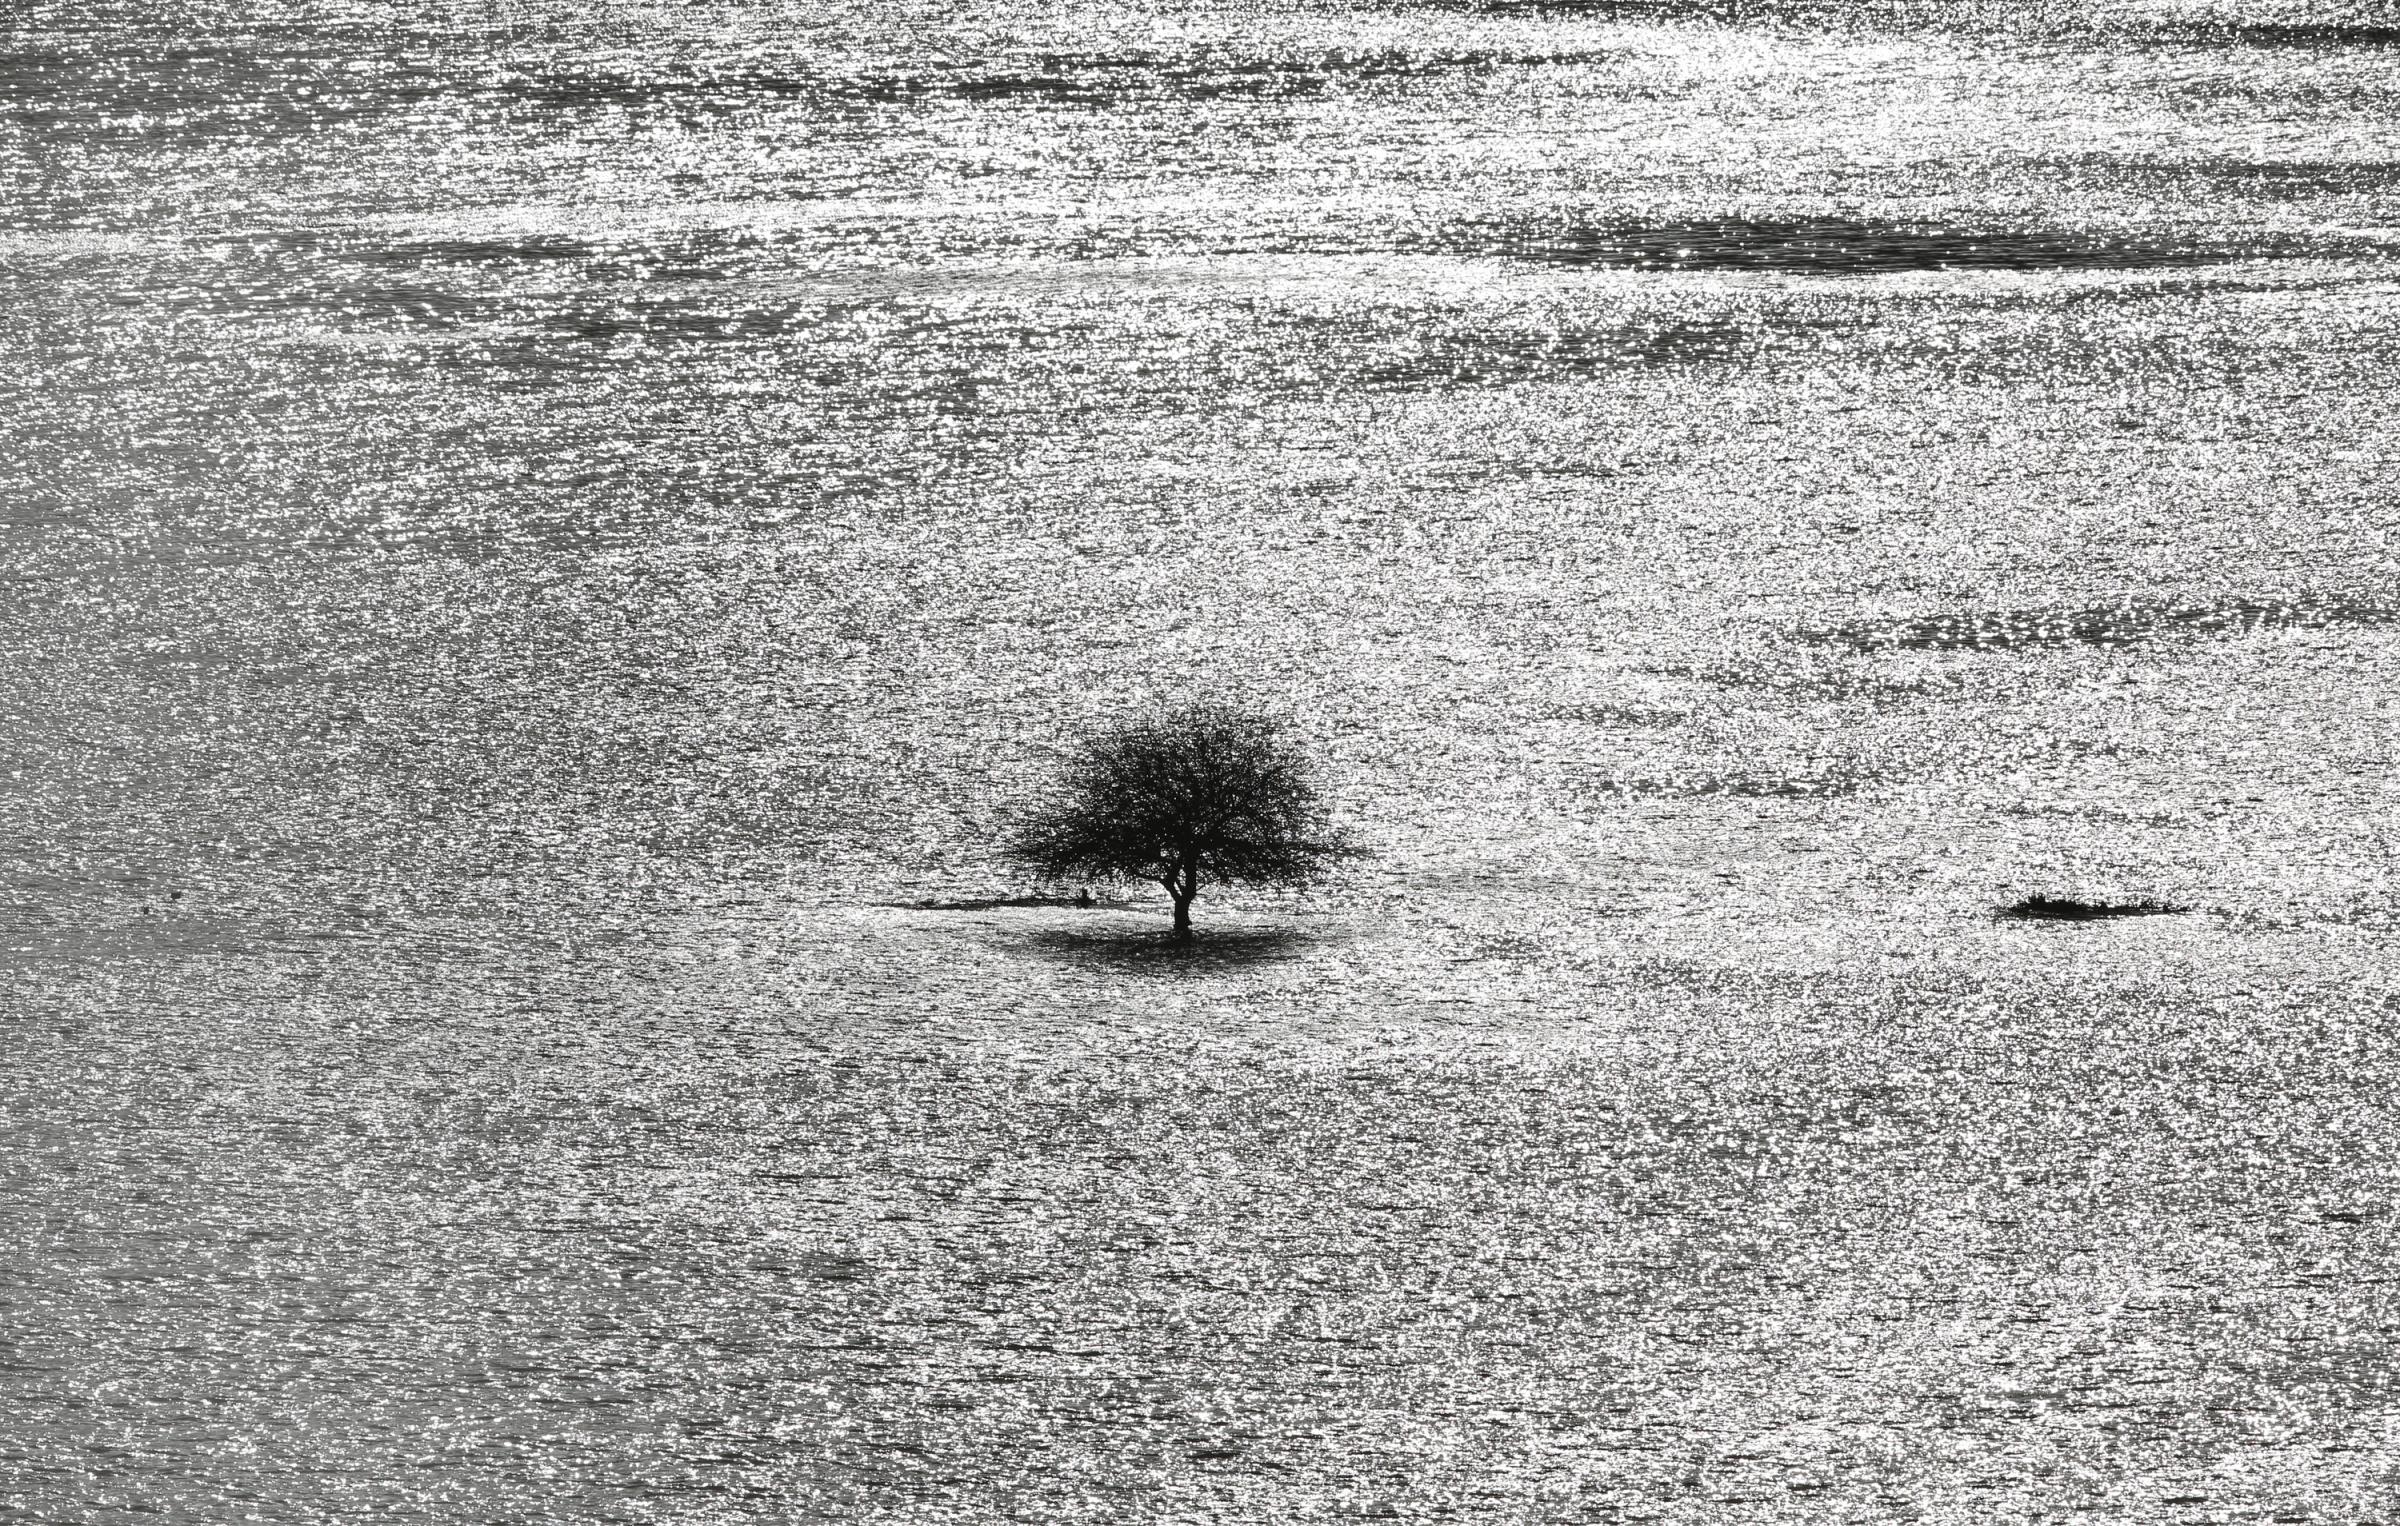 A lone tree stands in a snowy field in Hovel, England, Jan. 6, 2014.